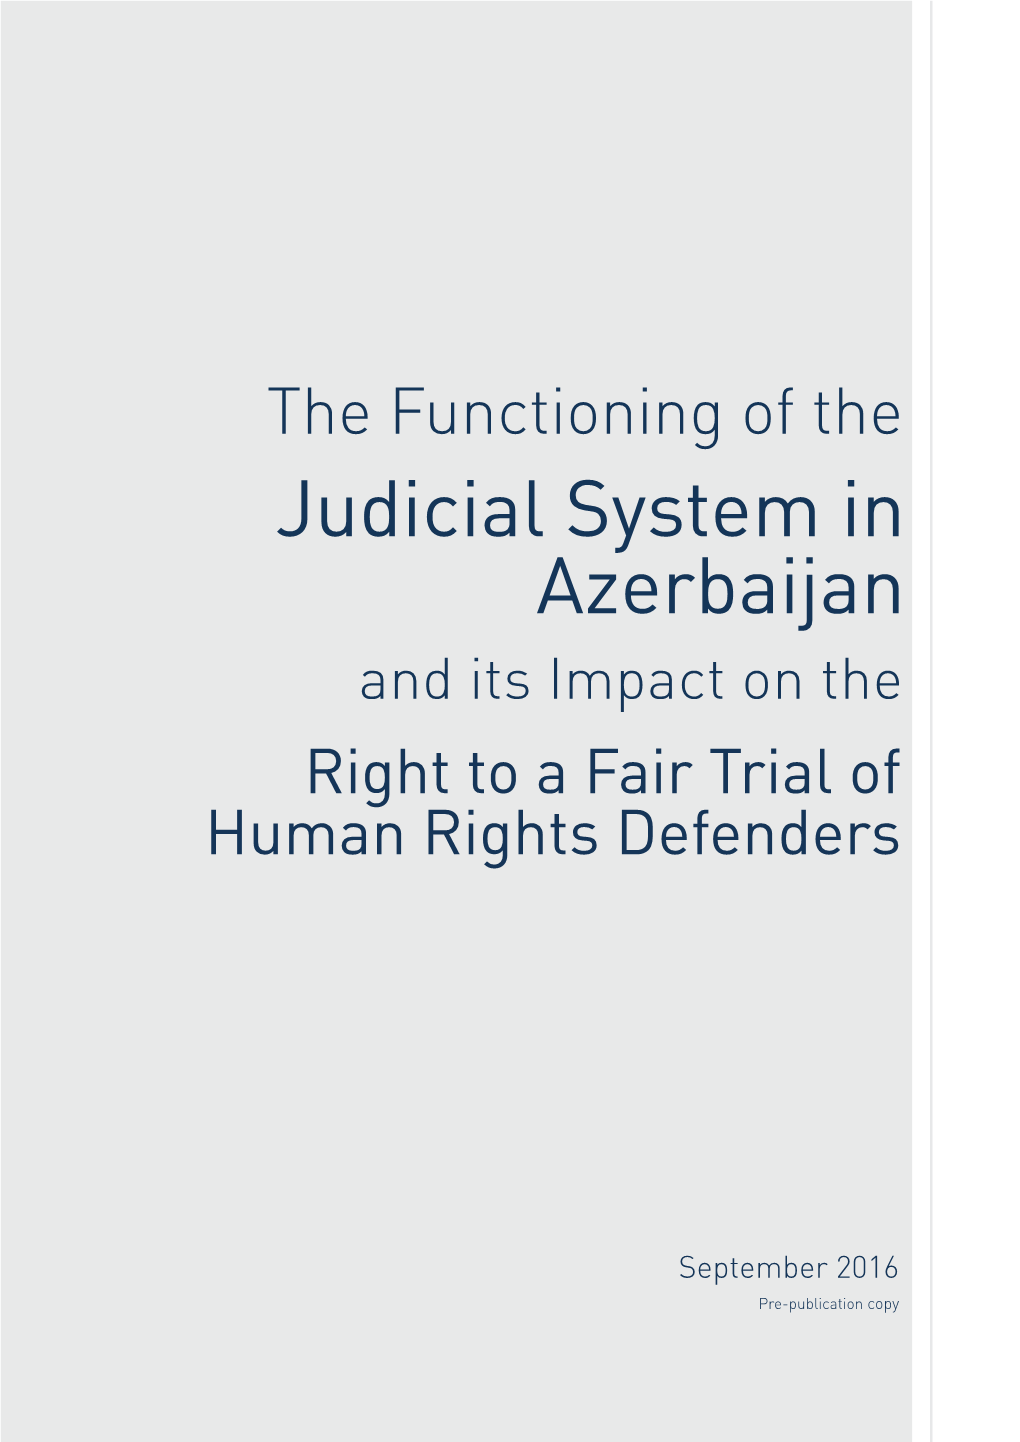 Judicial System in Azerbaijan and Its Impact on the Right to a Fair Trial of Human Rights Defenders